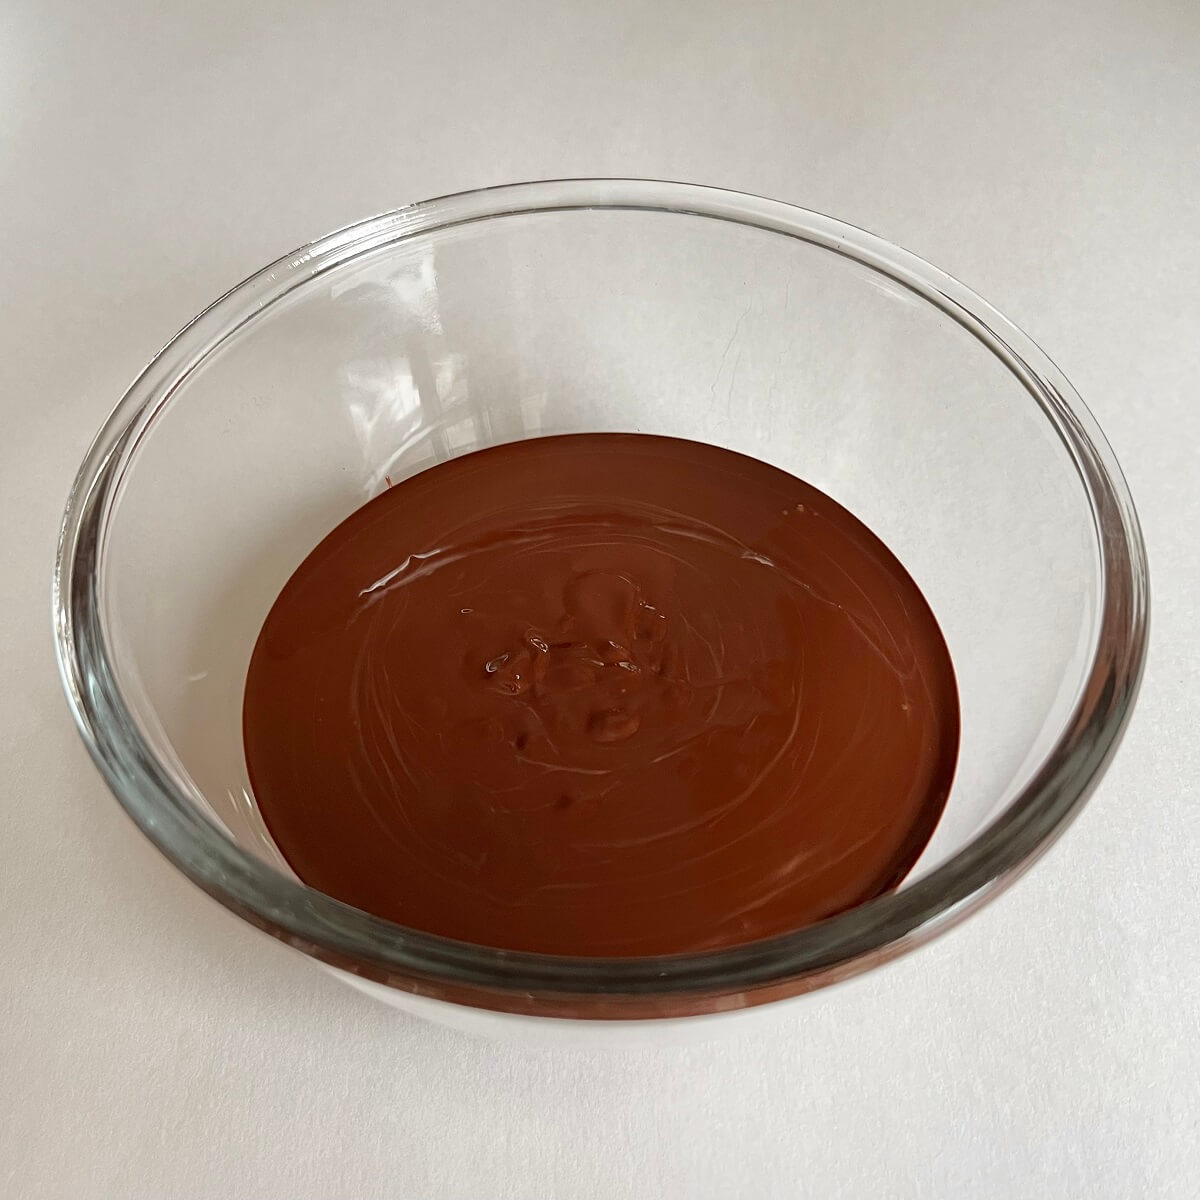 A glass bowl of warm melted dark chocolate.